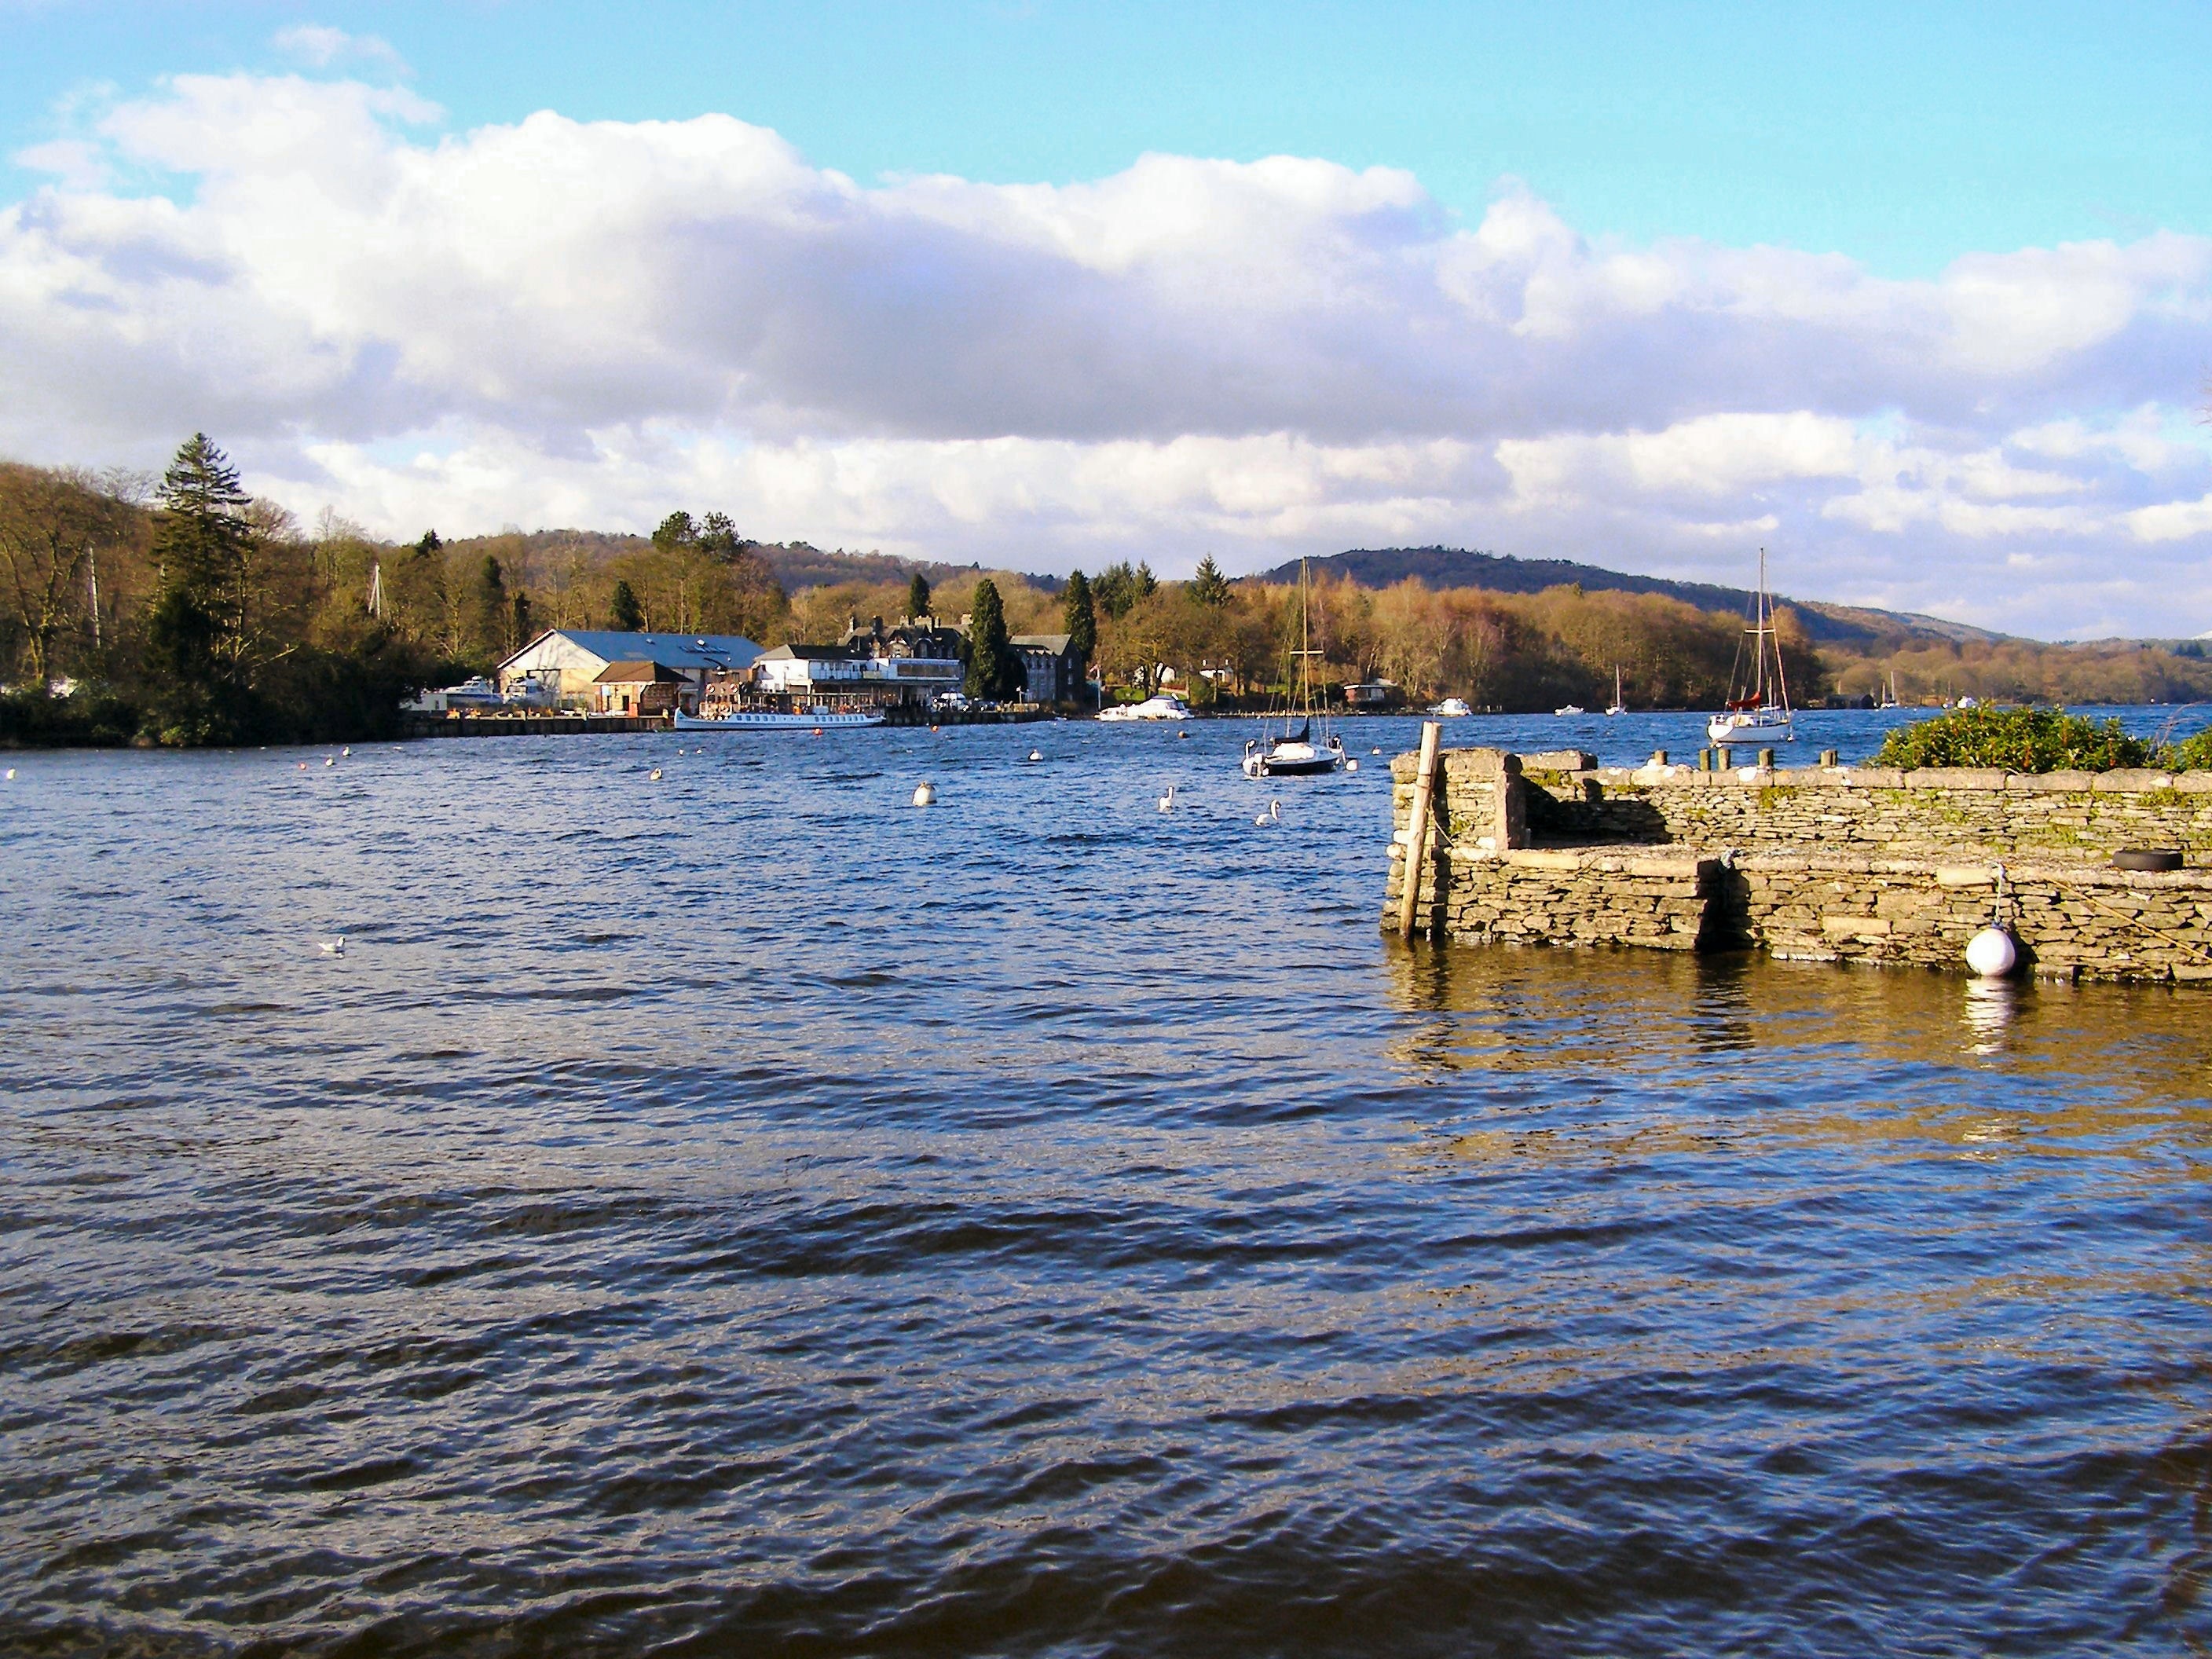 The Ro Hotel - Bowness-on-Windermere - Visit Lake District